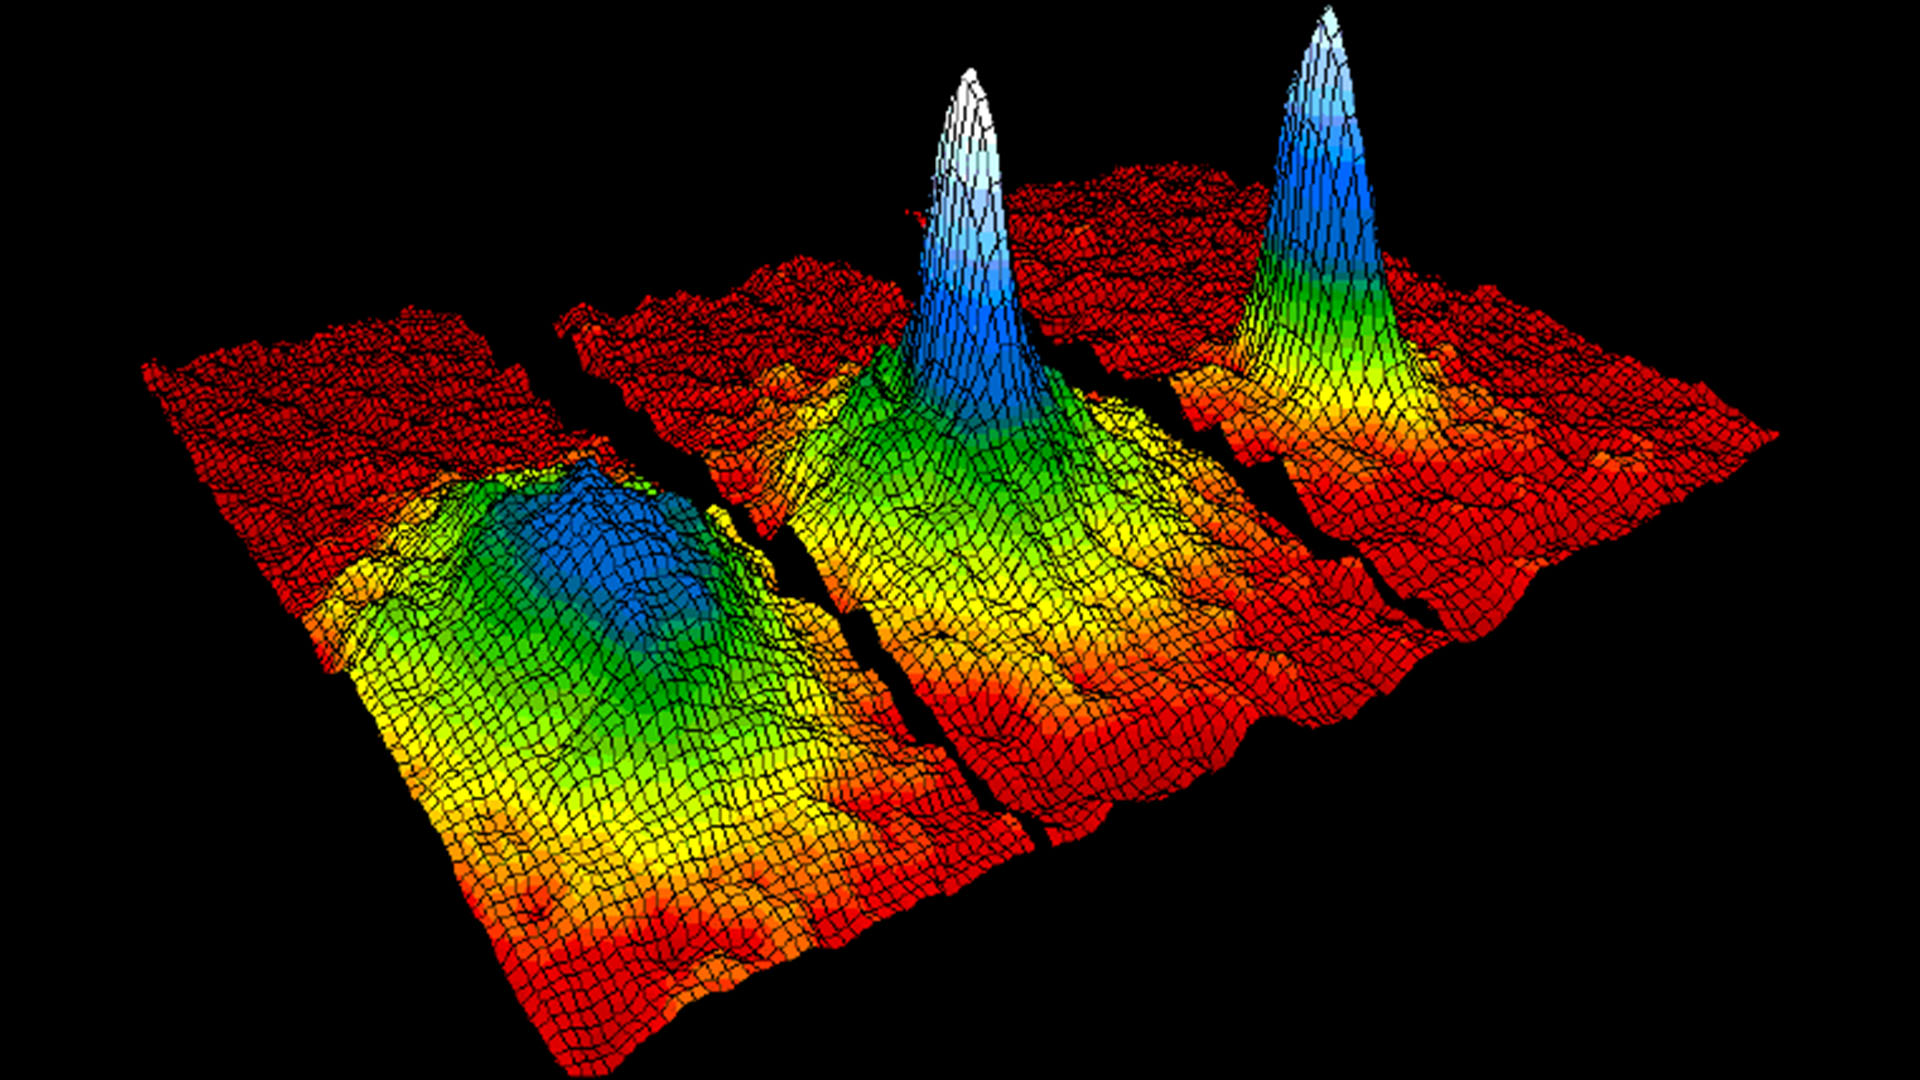 Velocity-distribution data (3 views) for gas of rubidium atoms, confirming the discovery of a new phase of matter, the Bose–Einstein condensate. Left: just before the appearance of a Bose–Einstein condensate. Center: just after the appearance of the condensate. Right: after further evaporation, leaving a sample of nearly pure condensate.